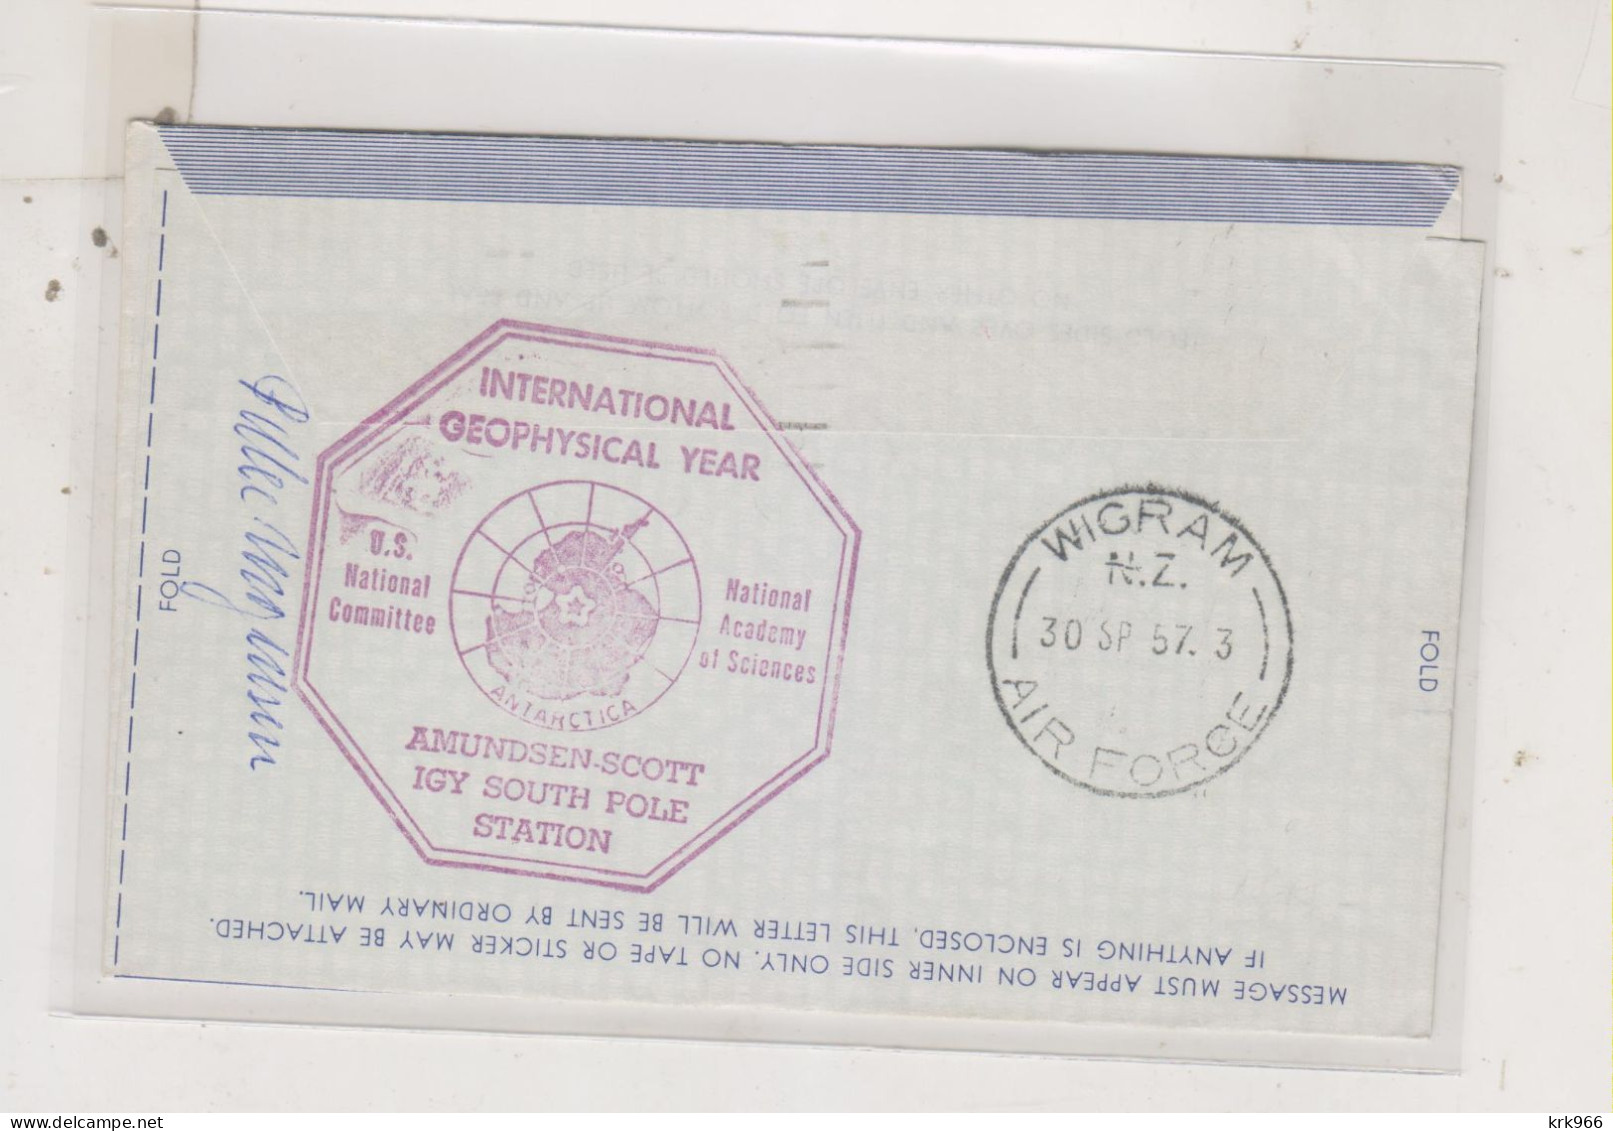 UNITED NATIONS 1957 Nice Airmail Stationery NEW YORK To AMUNDSEN SCOTT IGY SOUTH POLE STATION - Covers & Documents